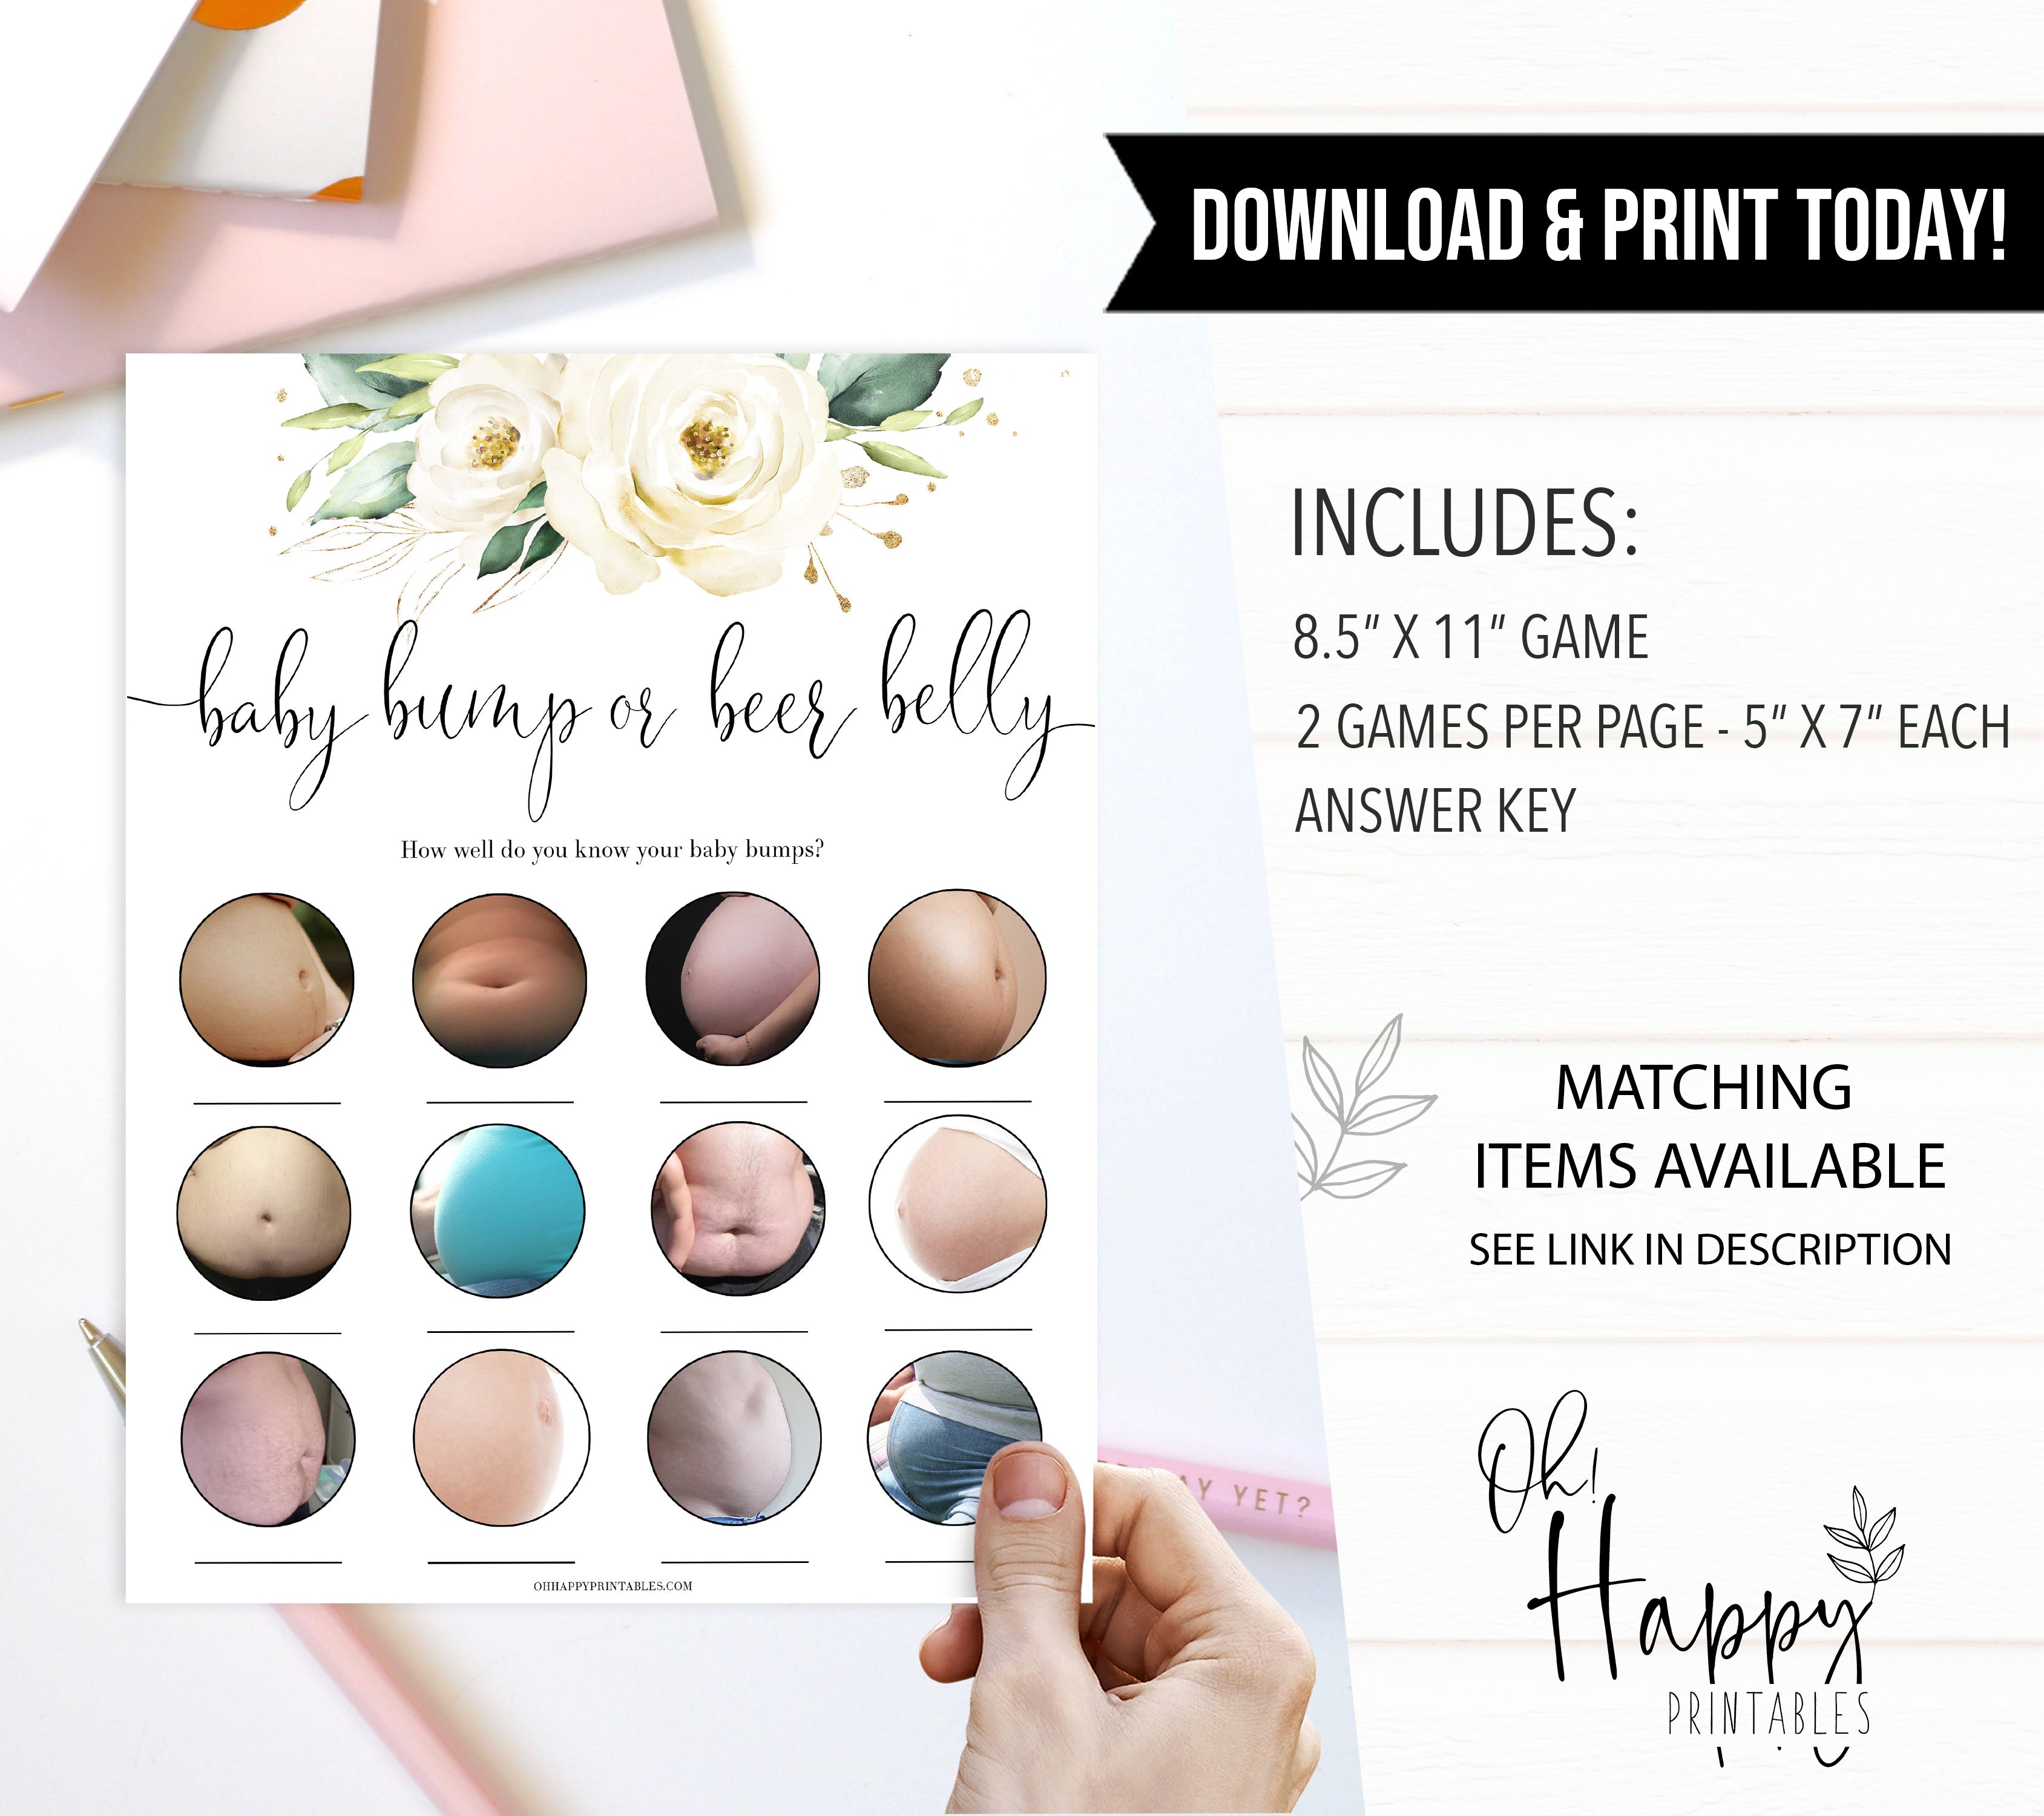 baby bump or beer belly game, Printable baby shower games, shite floral baby games, baby shower games, fun baby shower ideas, top baby shower ideas, floral baby shower, baby shower games, fun floral baby shower ideas